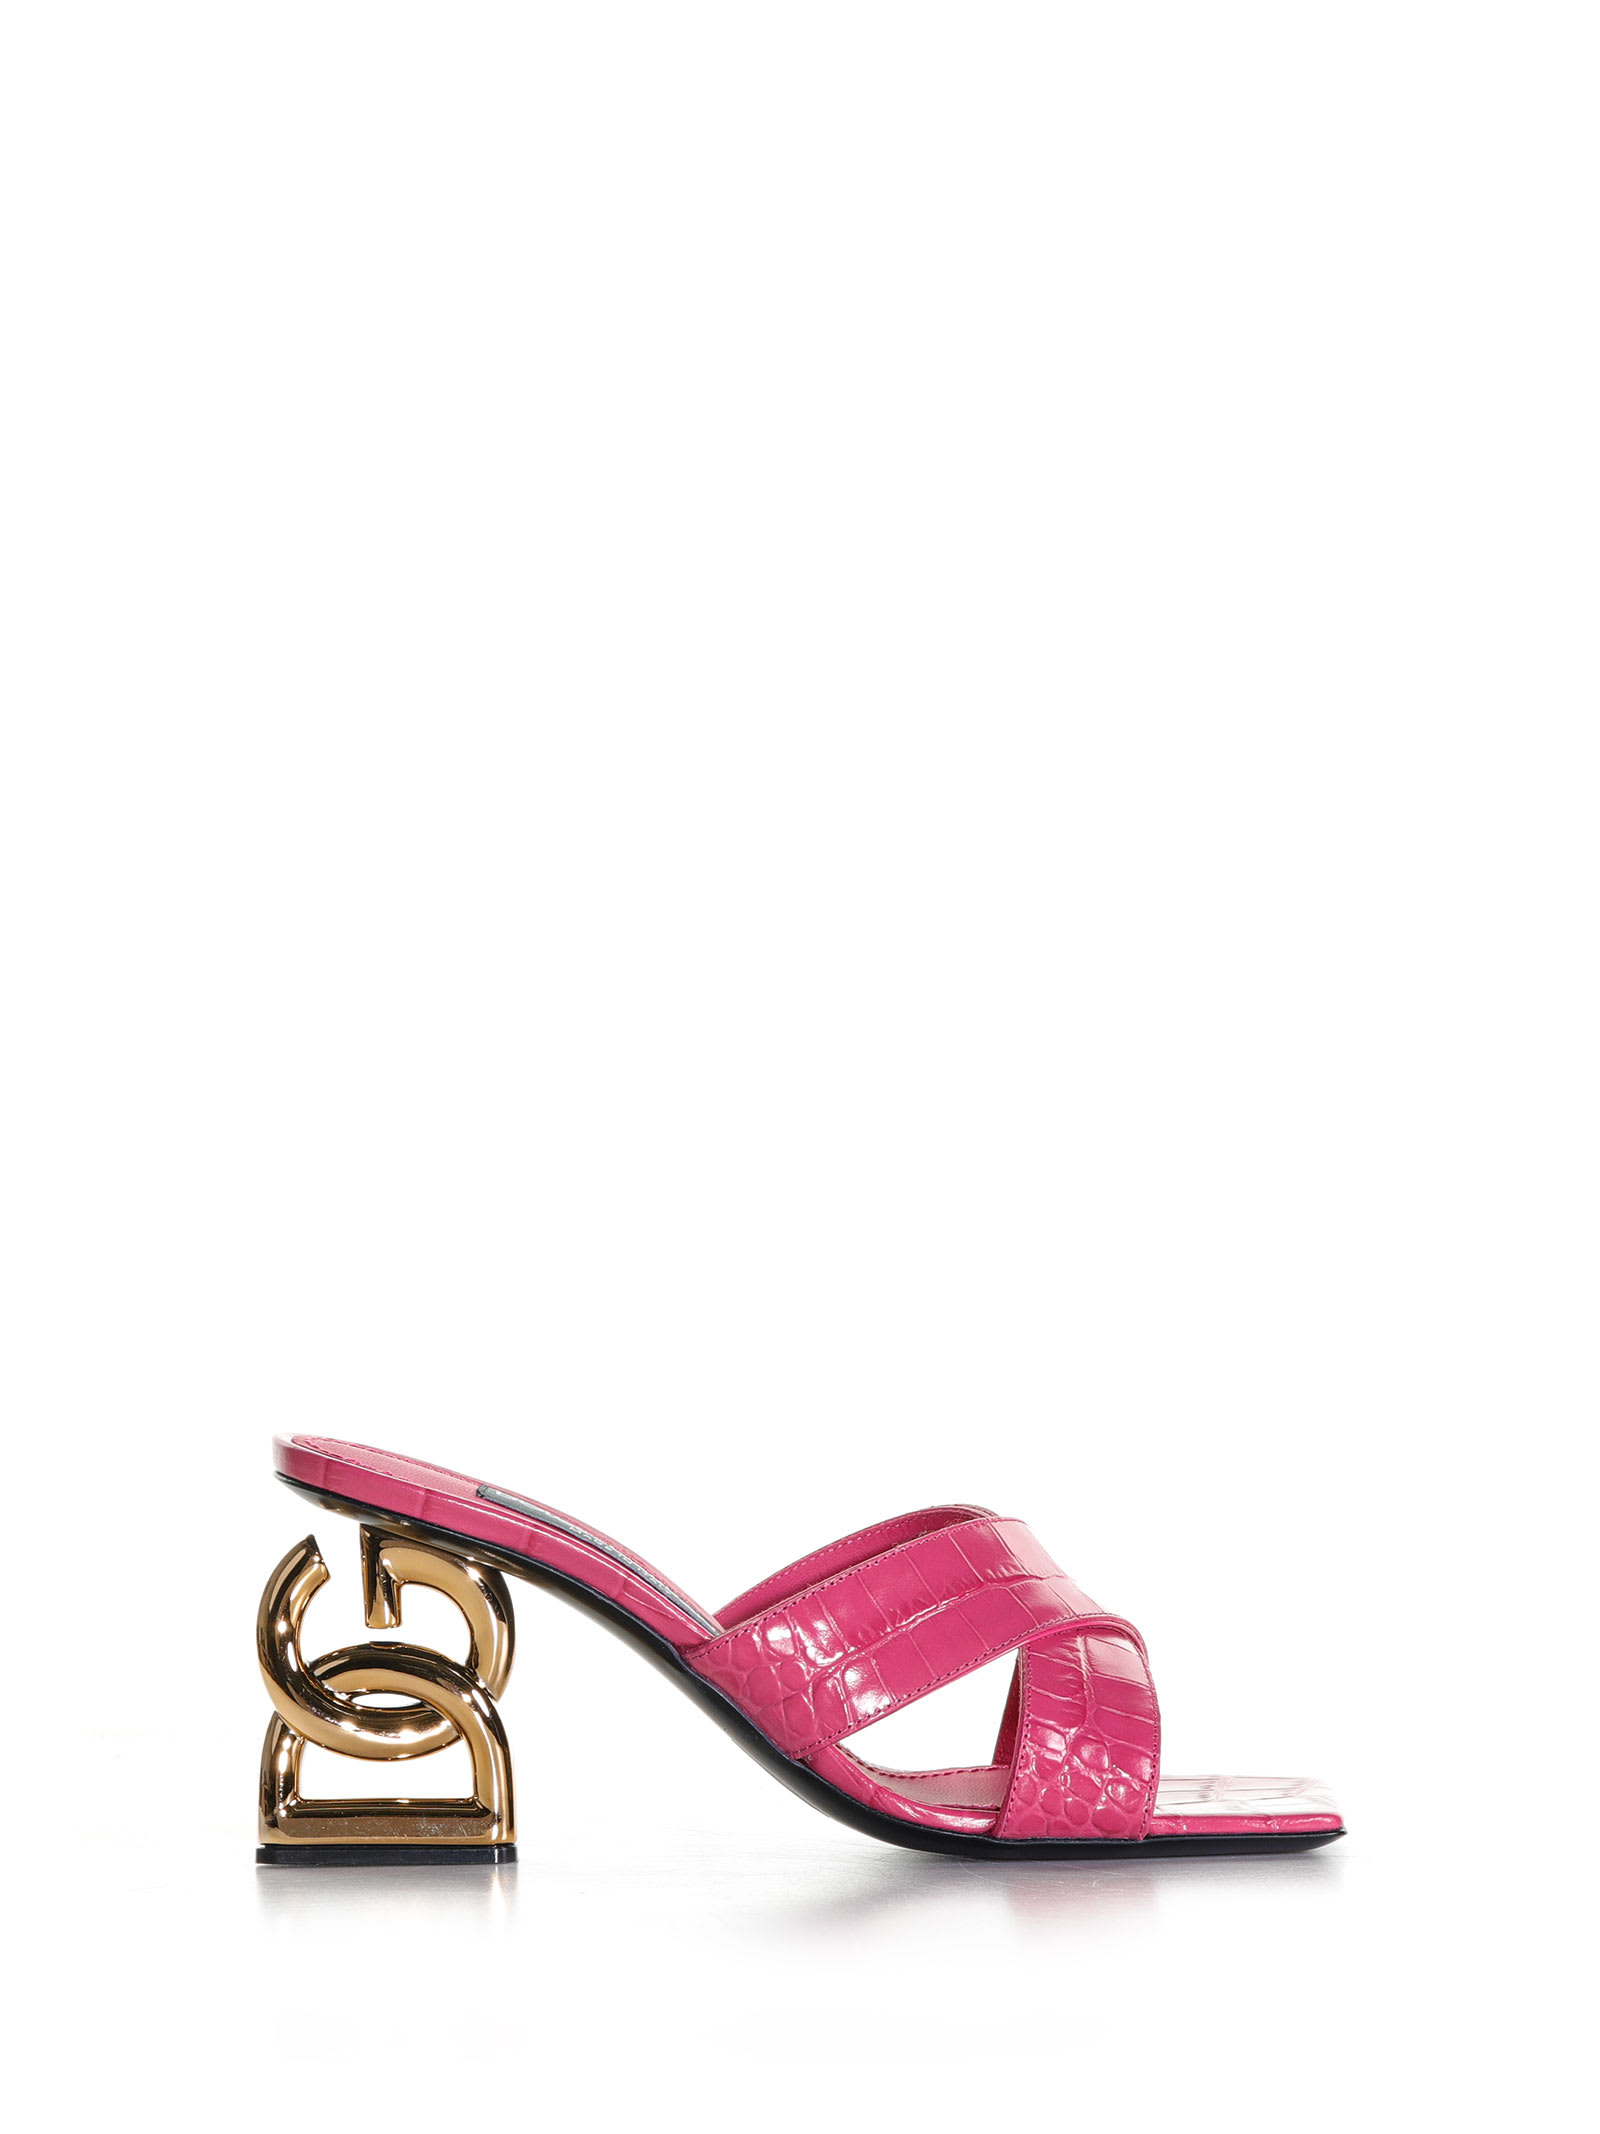 DOLCE & GABBANA SHINY LEATHER MULES WITH LOGOED HEEL